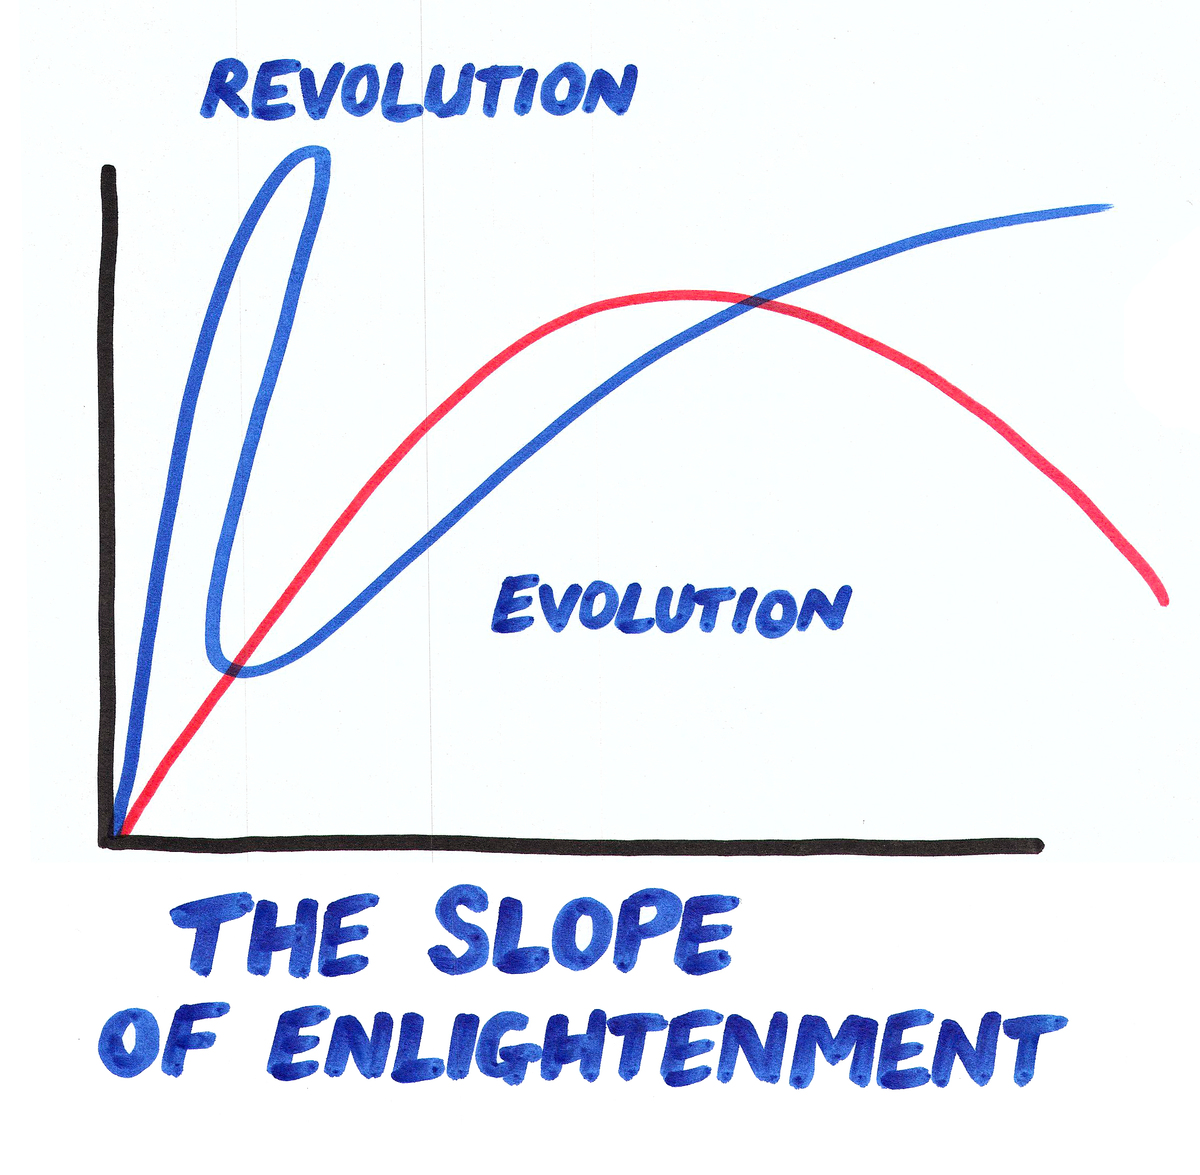 The slope of enlightenment